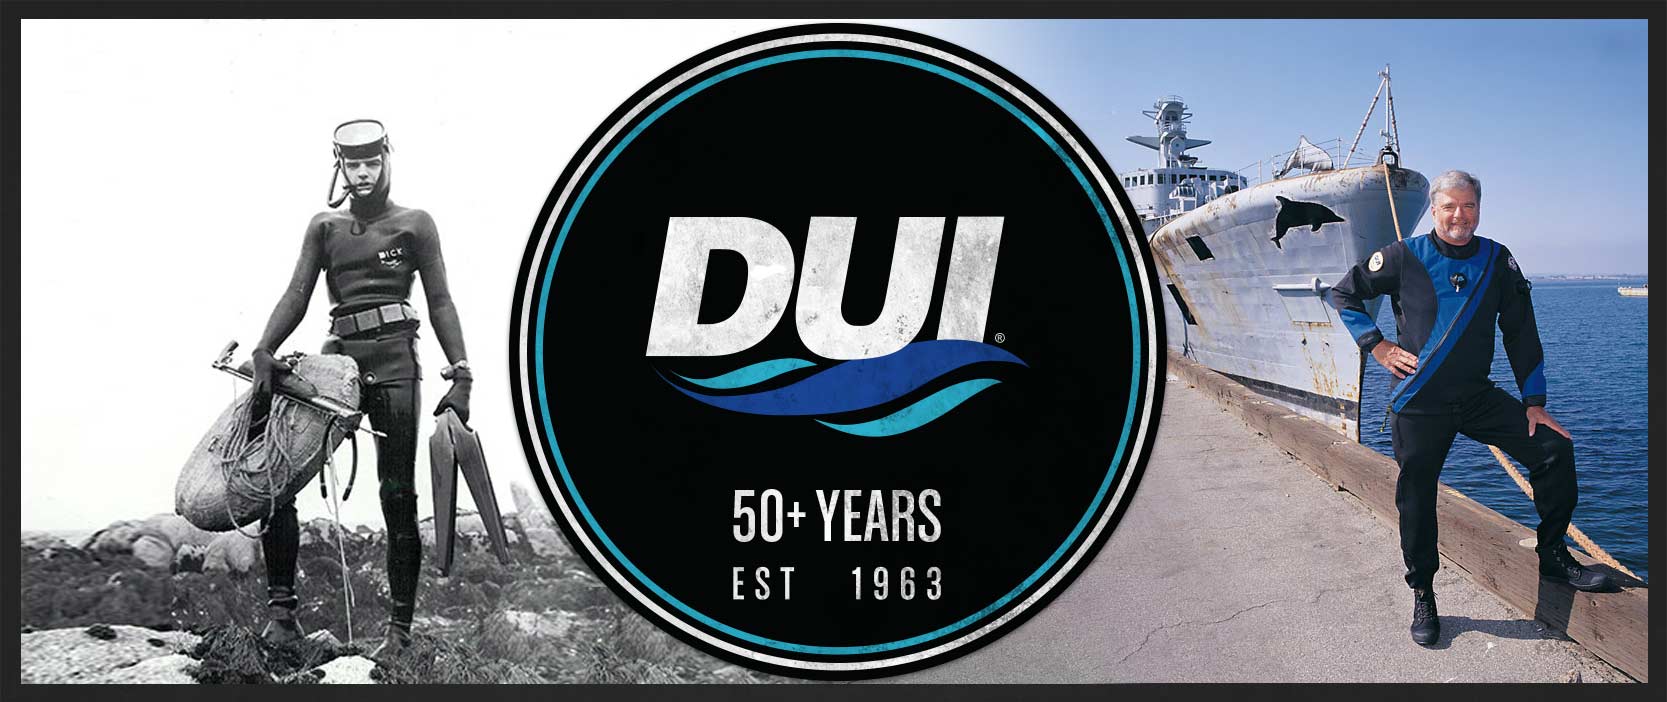 DUI | Diving Unlimited International - Diving Drysuits and Dive Gear More than 50 Years of Thermal Protection Diving Experience